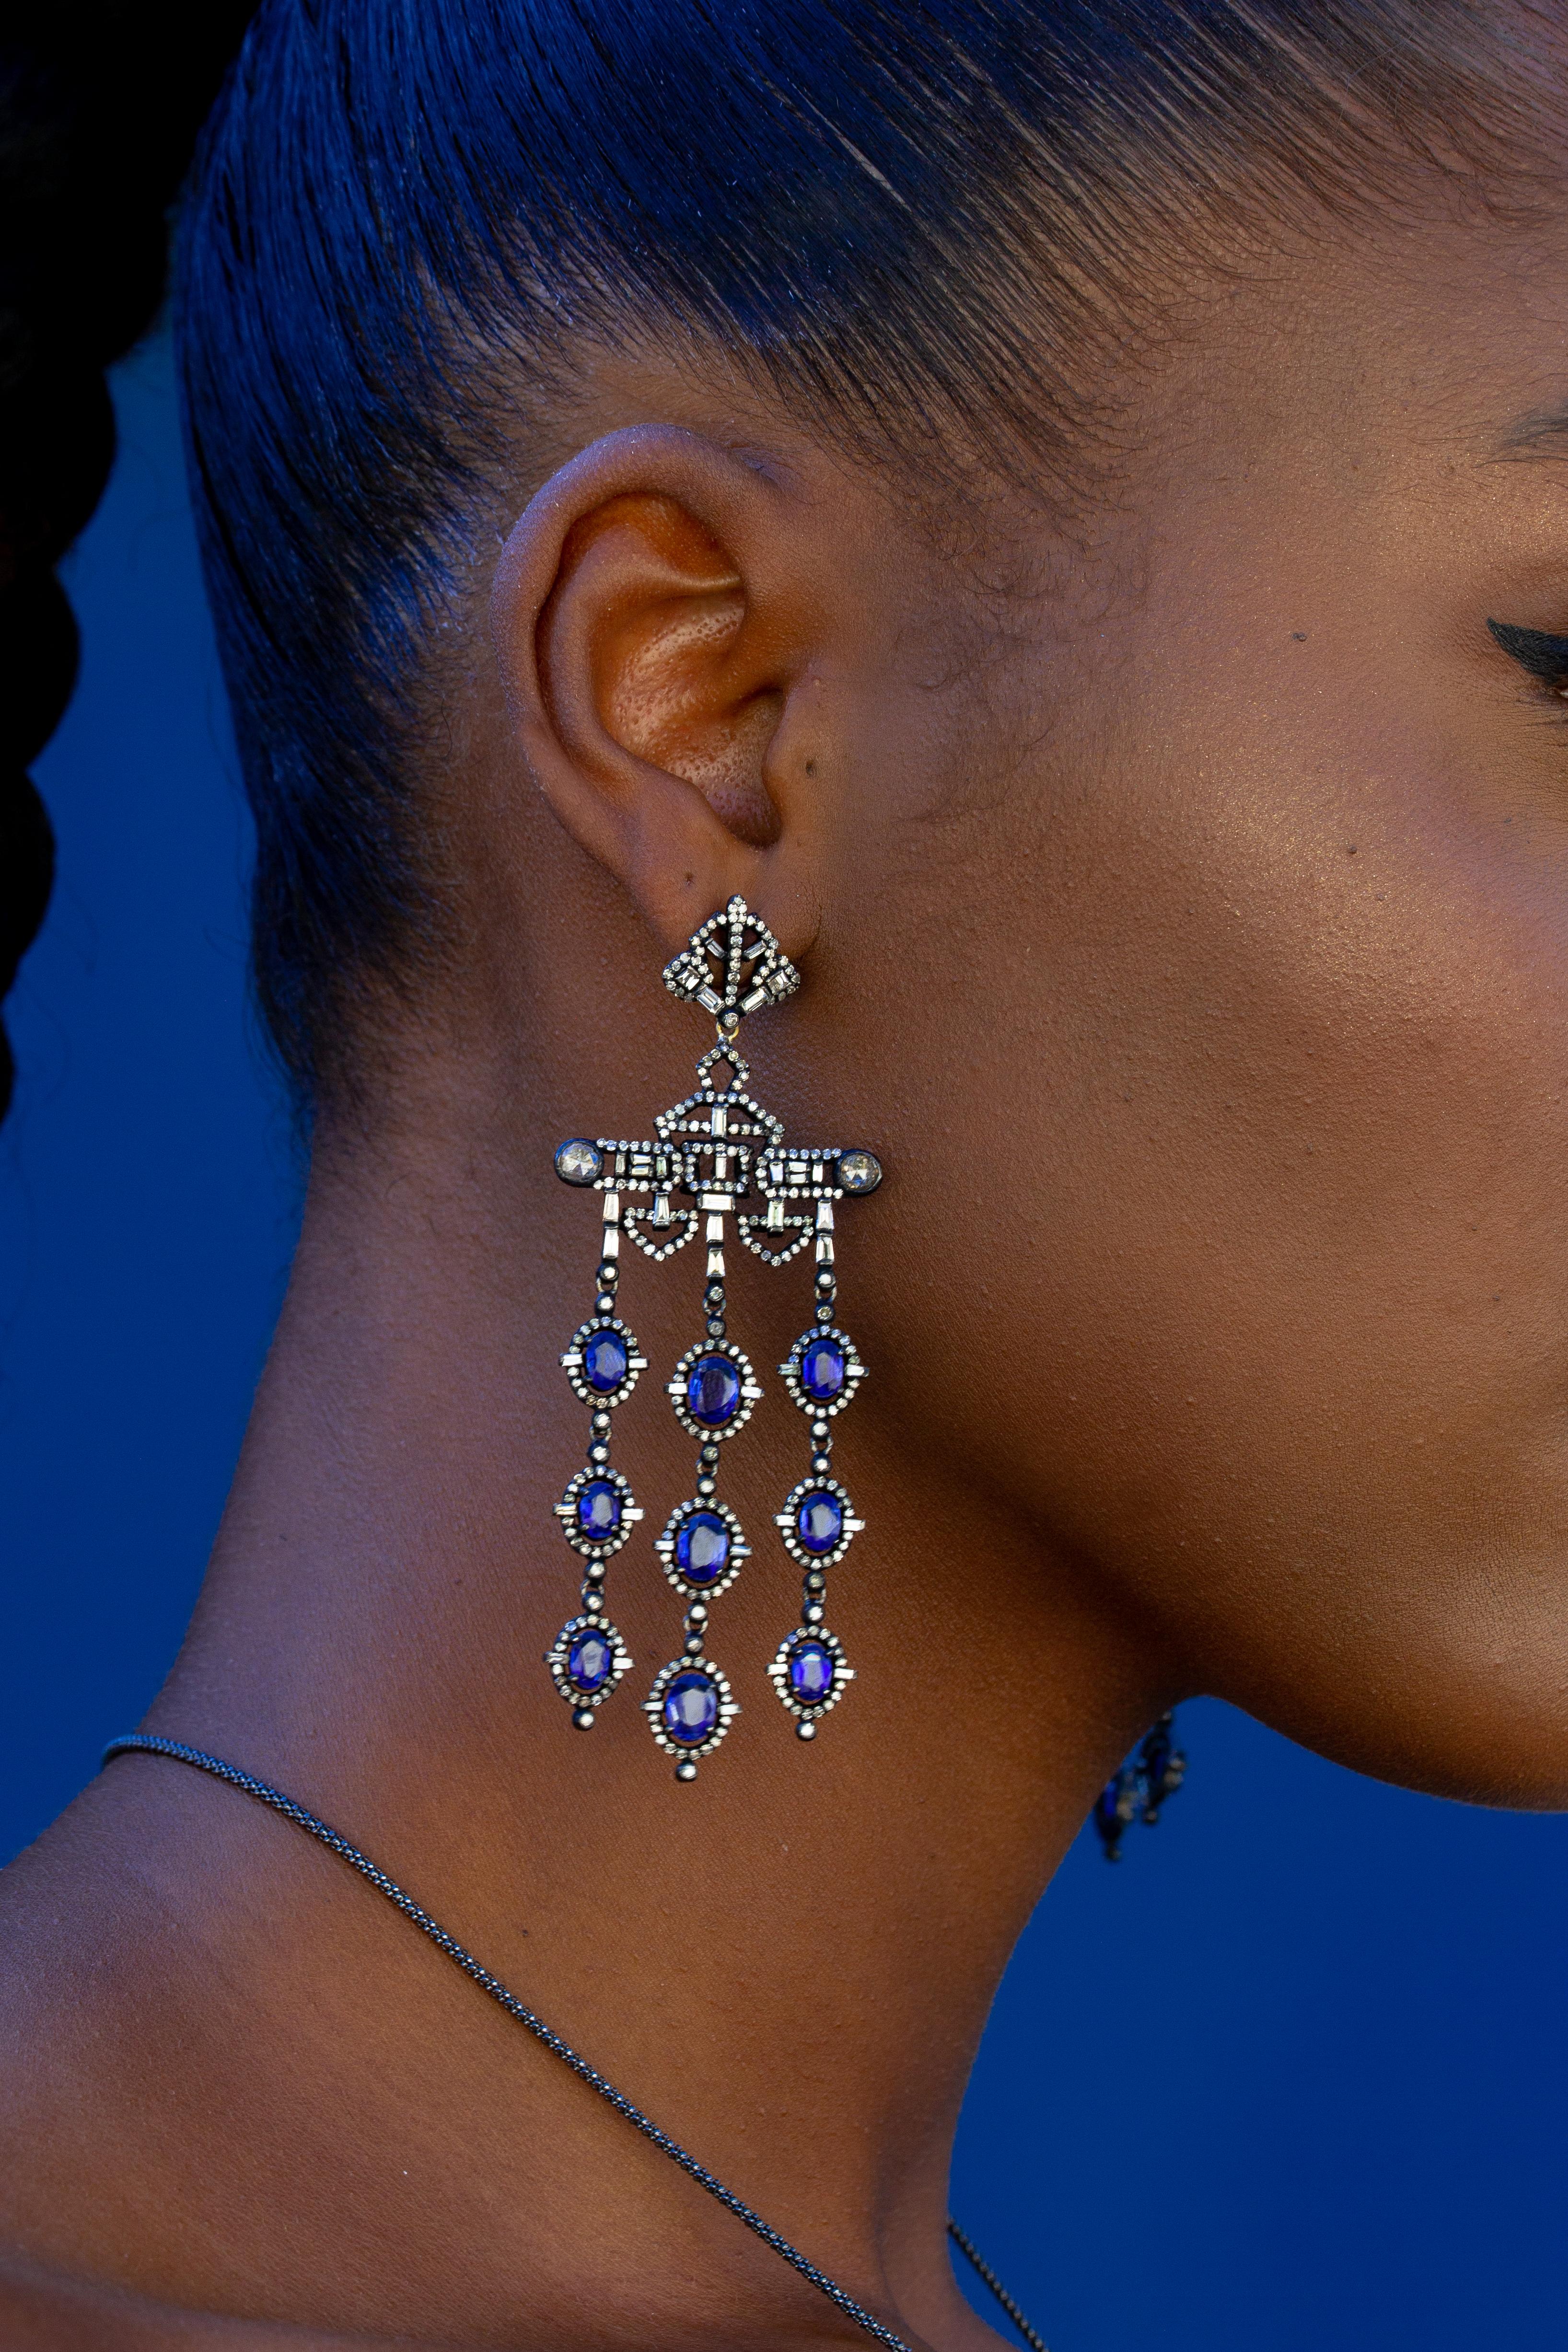 Evoking royalty, this chandelier style earring features Kyanites, accented with diamonds in oxidized silver. The combination of the cool-toned kyanite and the sparkle of the diamonds makes this earring set a true timeless classic.